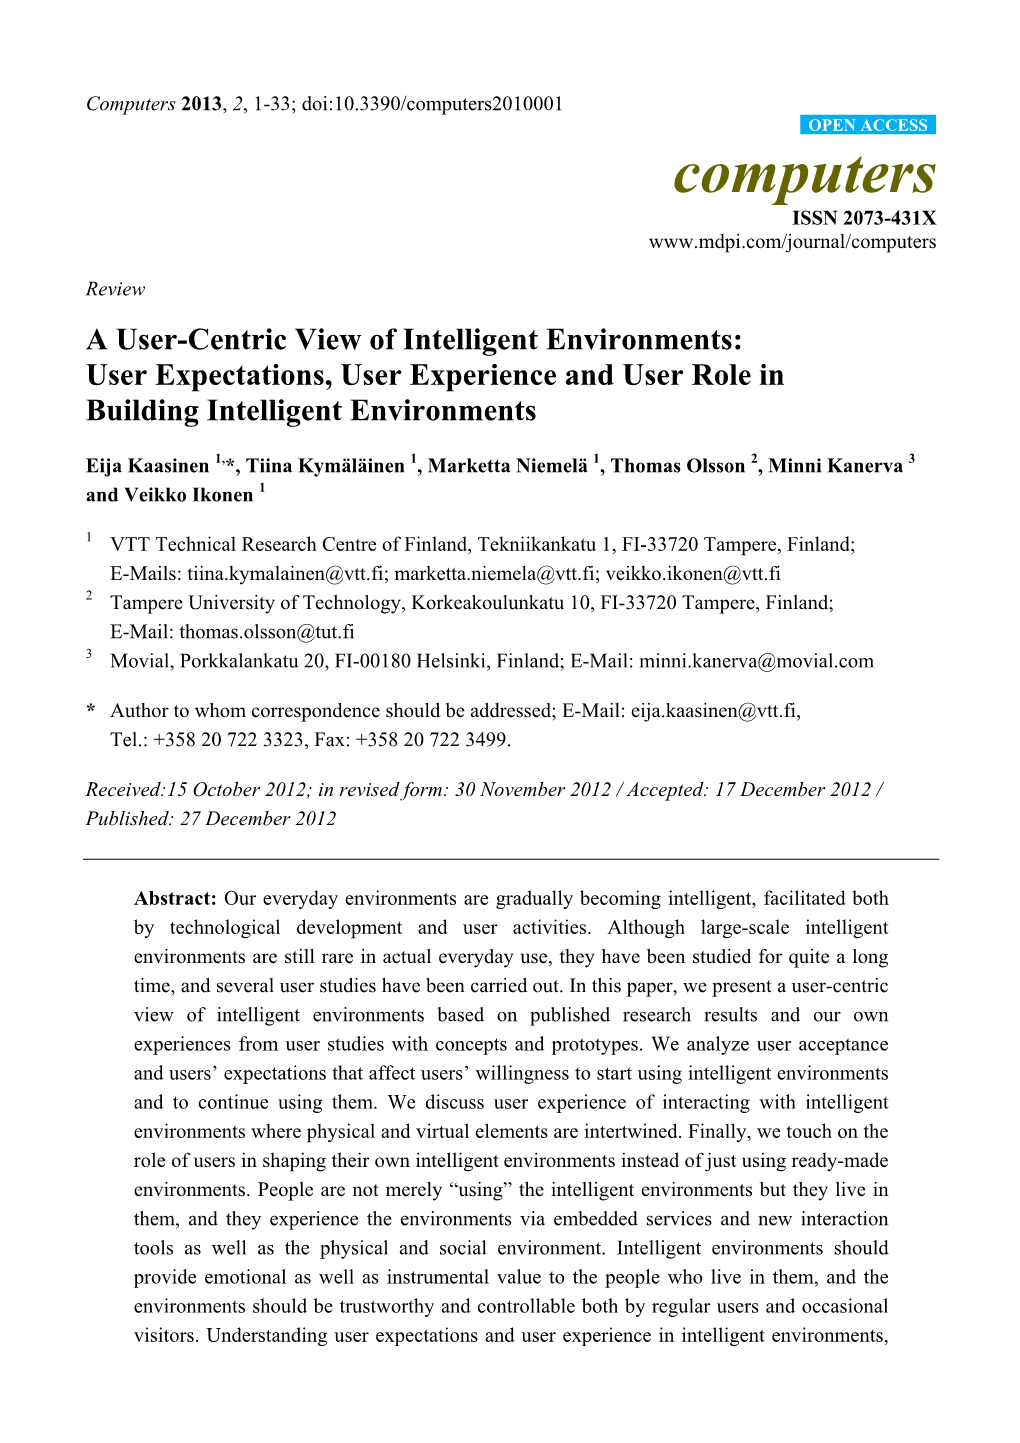 A User-Centric View of Intelligent Environments: User Expectations, User Experience and User Role in Building Intelligent Environments